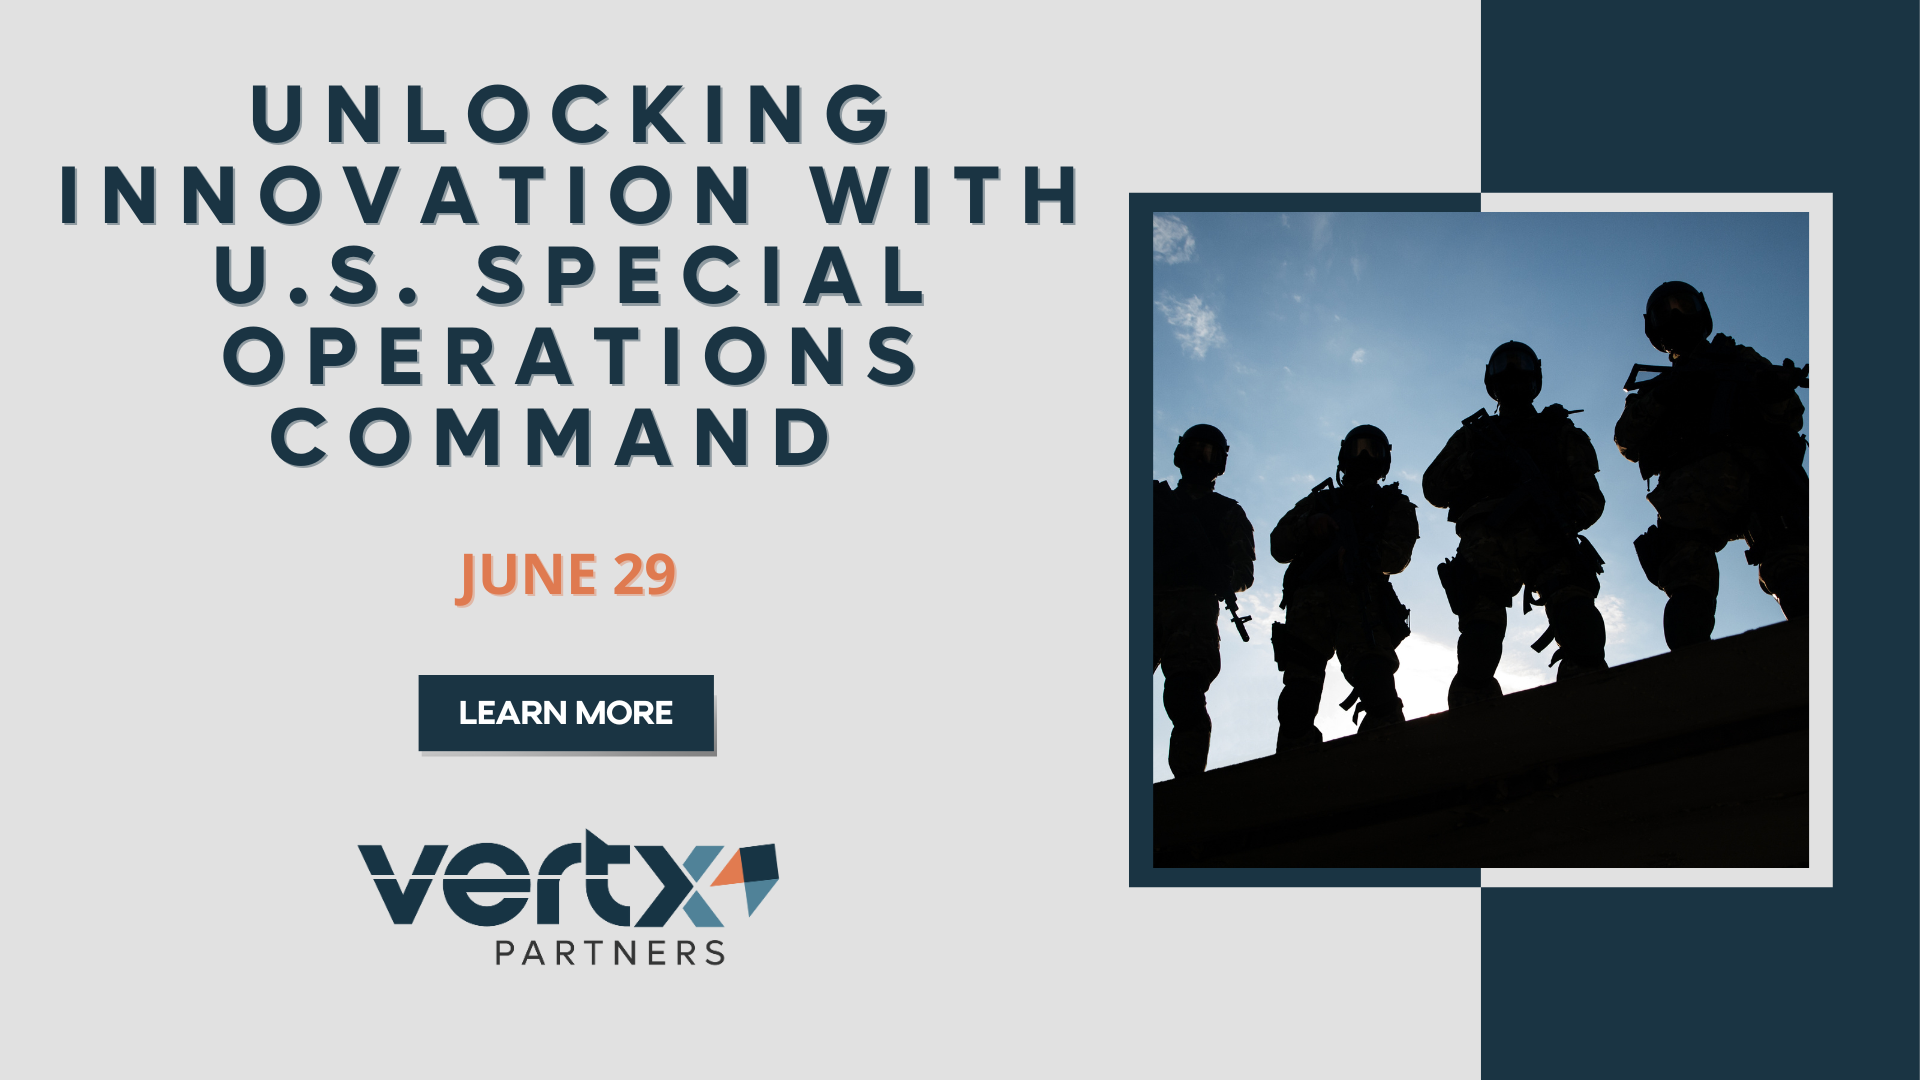 This graphic has the title "Unlocking Innovation with U.S. Special Operations Command SBIR/STTR Opportunities" with the date june 29th under it and a photo of 4 men in uniform next to it.